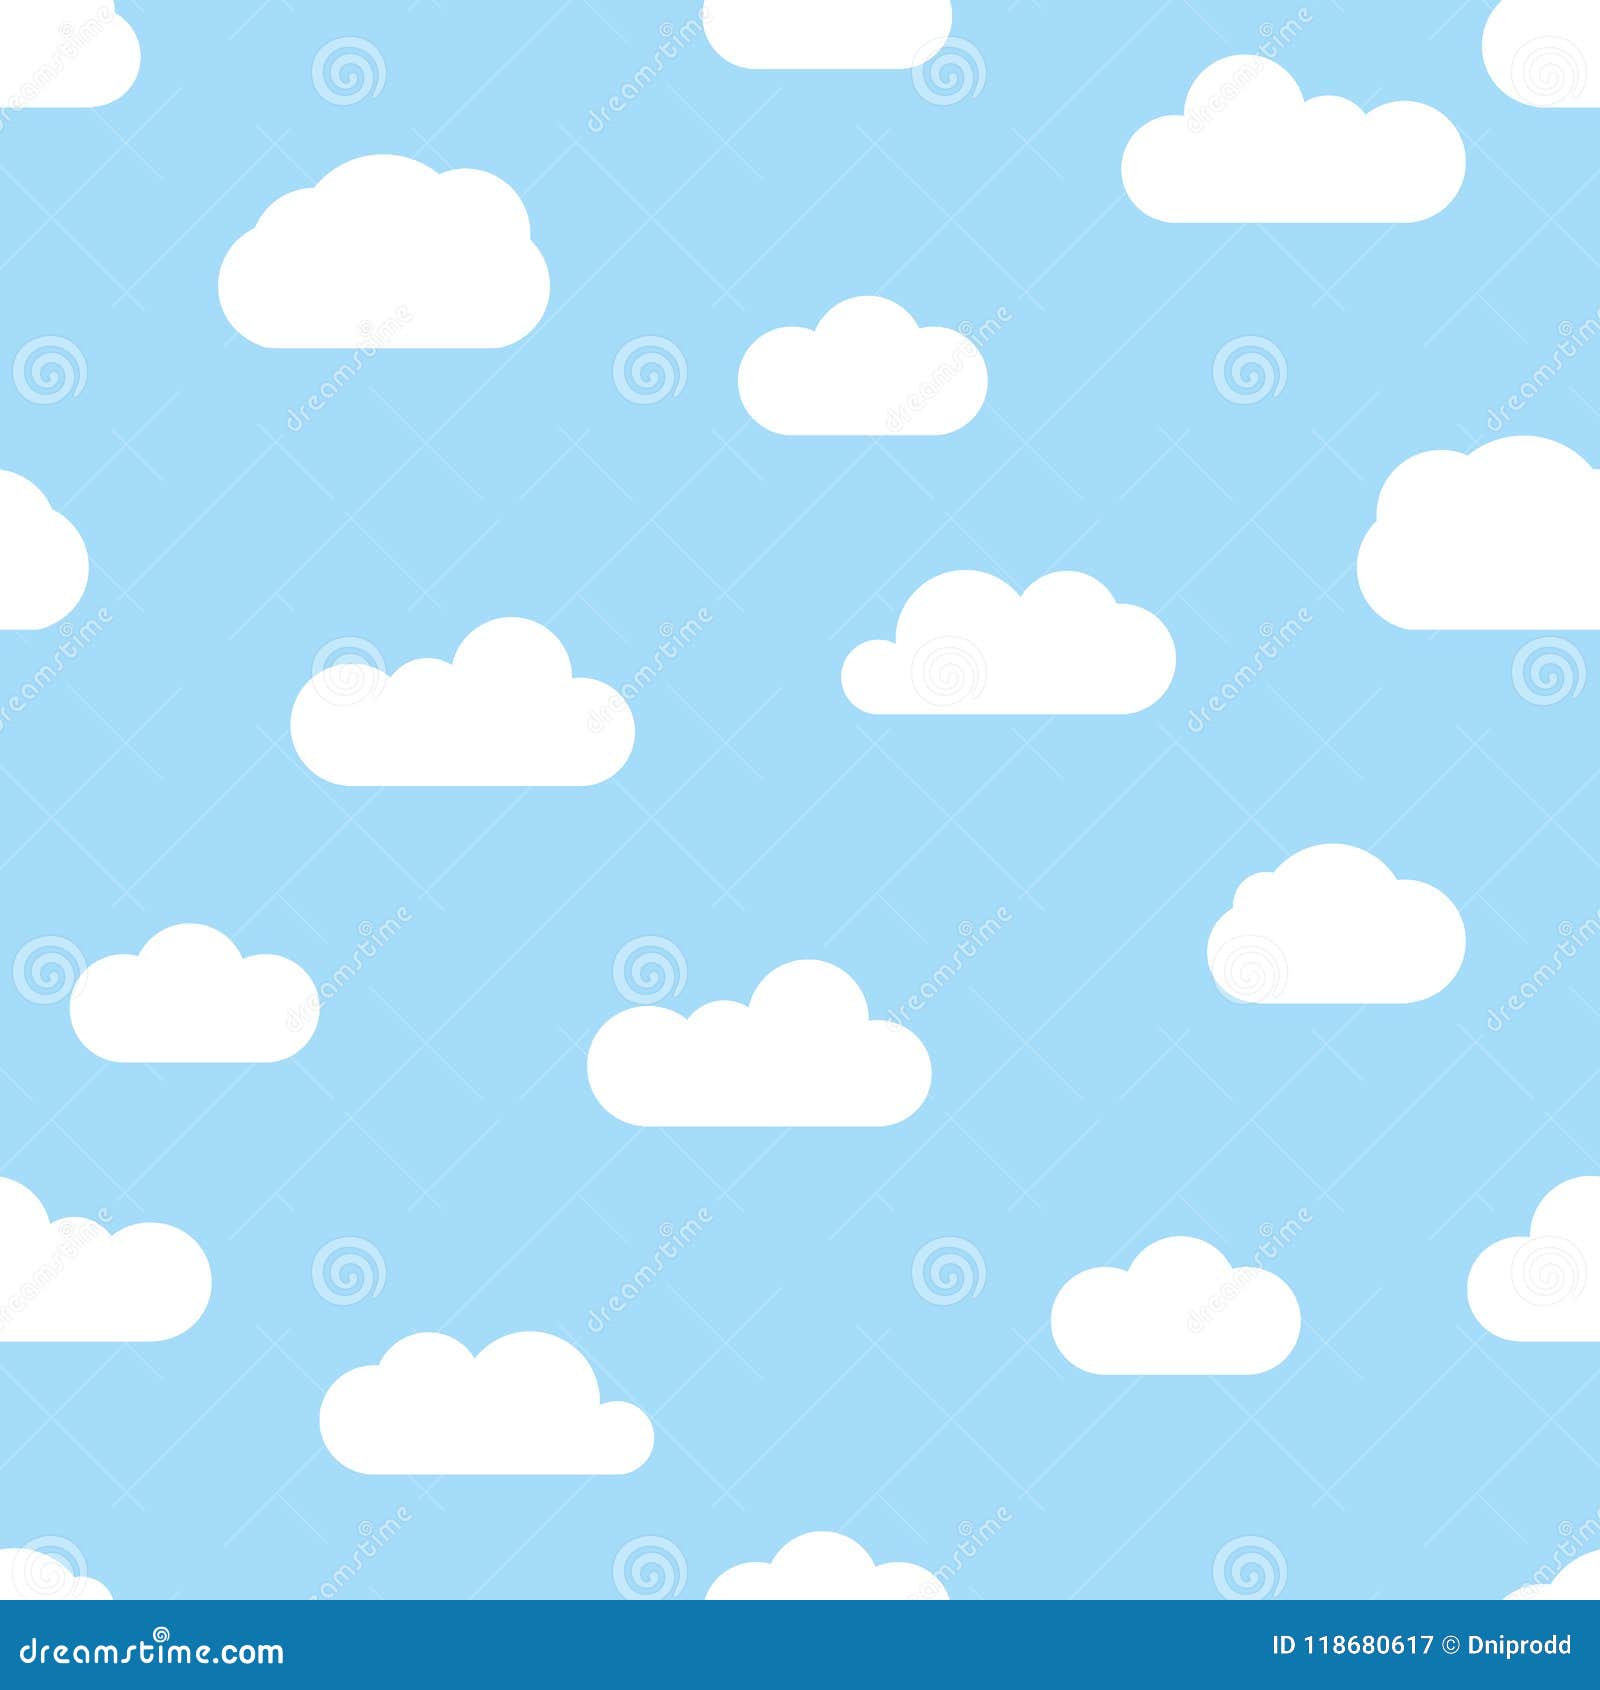 Seamless Background With Blue Sky And White Cartoon Clouds Stock Vector Illustration Of Environment Paper 118680617